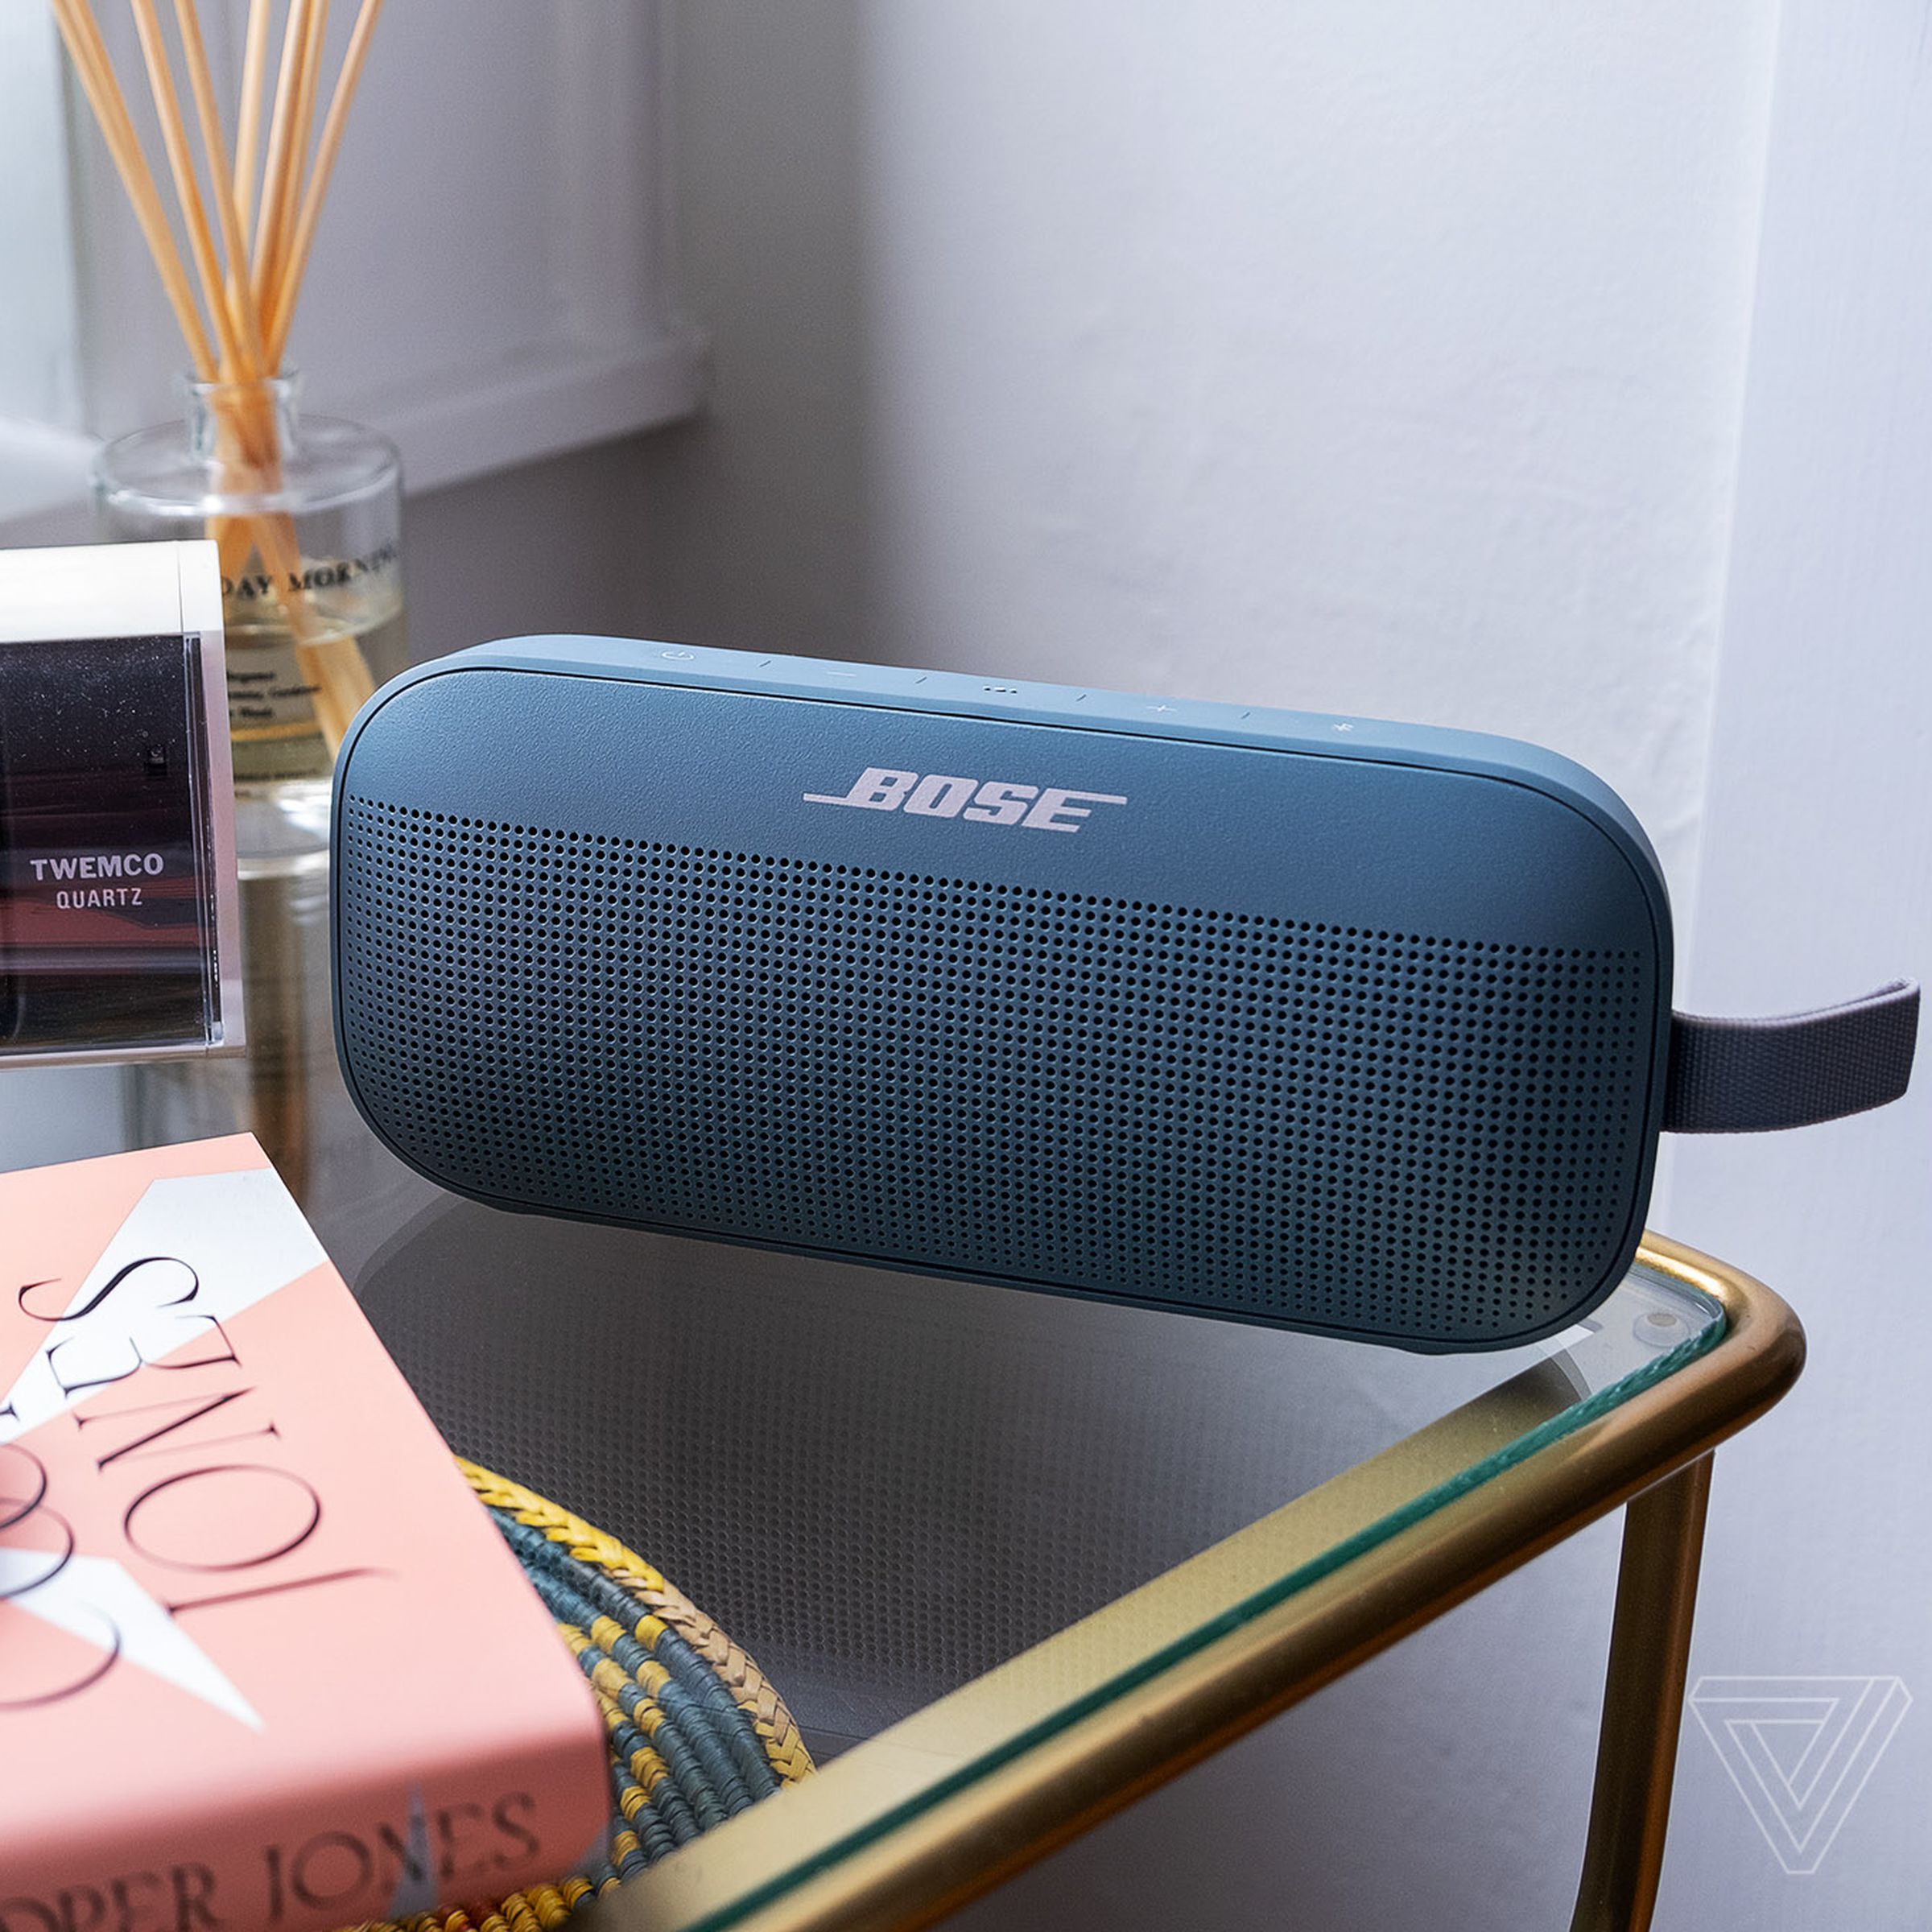 A photo of the Bose SoundLink Flex on a bedside table.